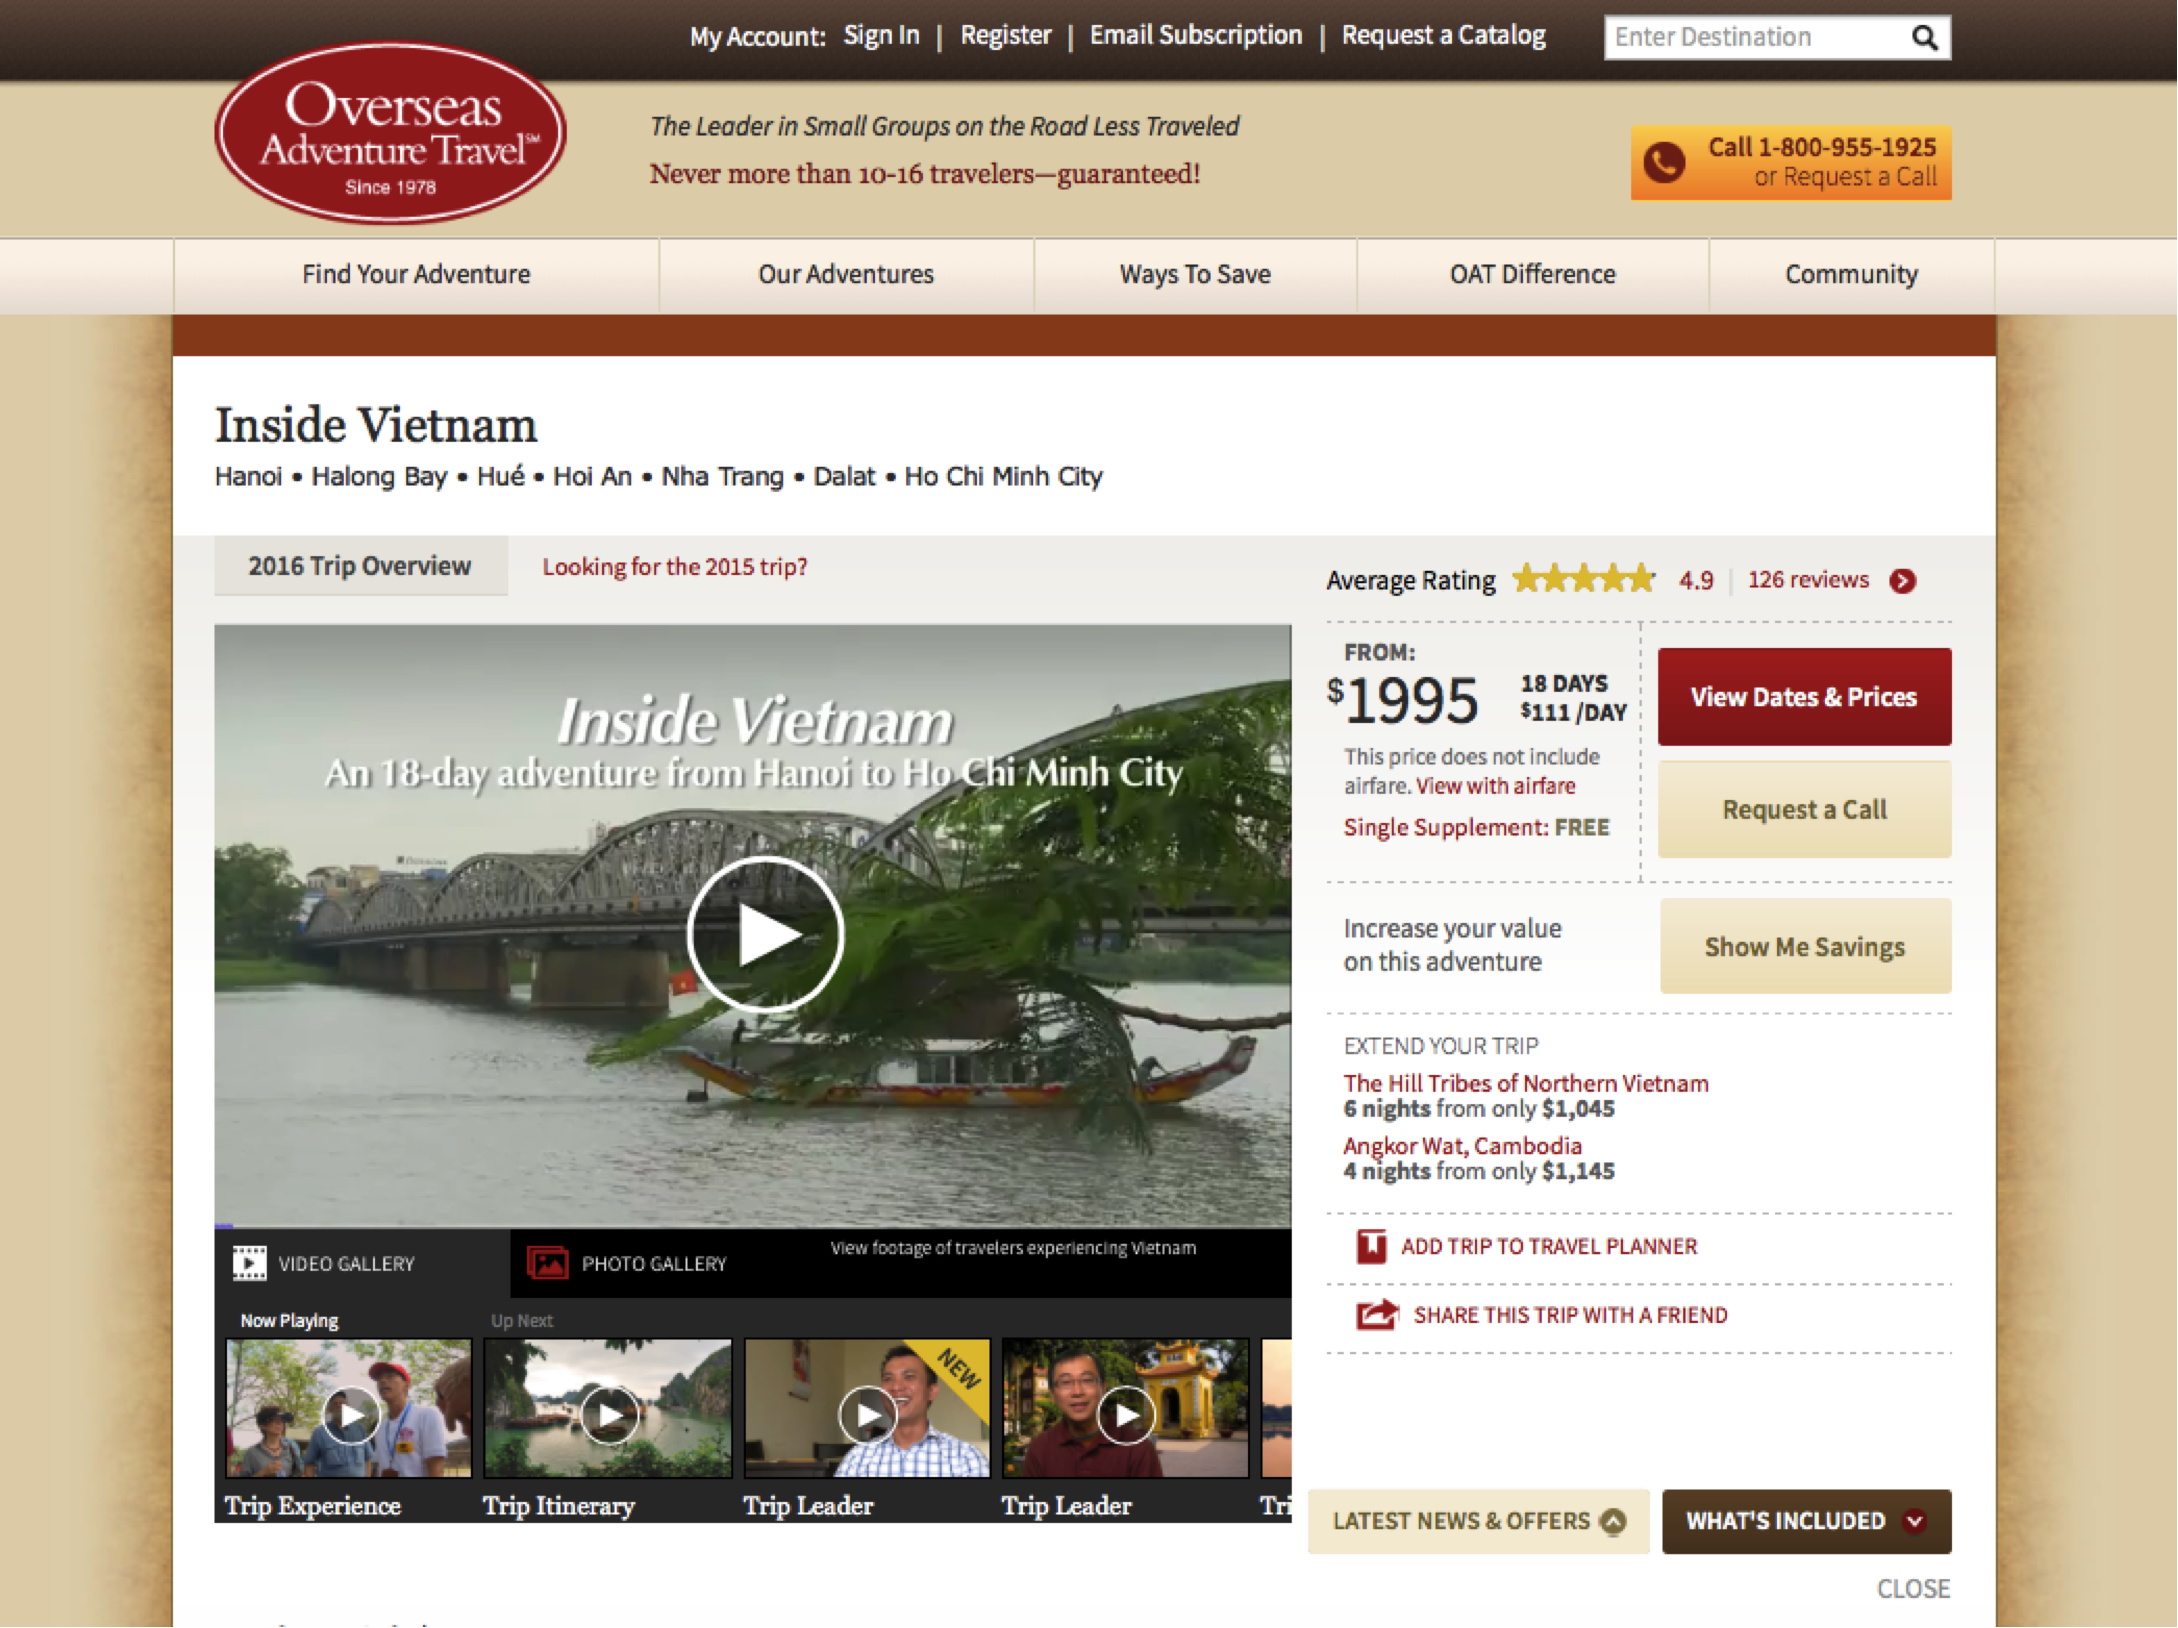 Overseas Adventure Travel landing page with a Brightcove Video Gallery player